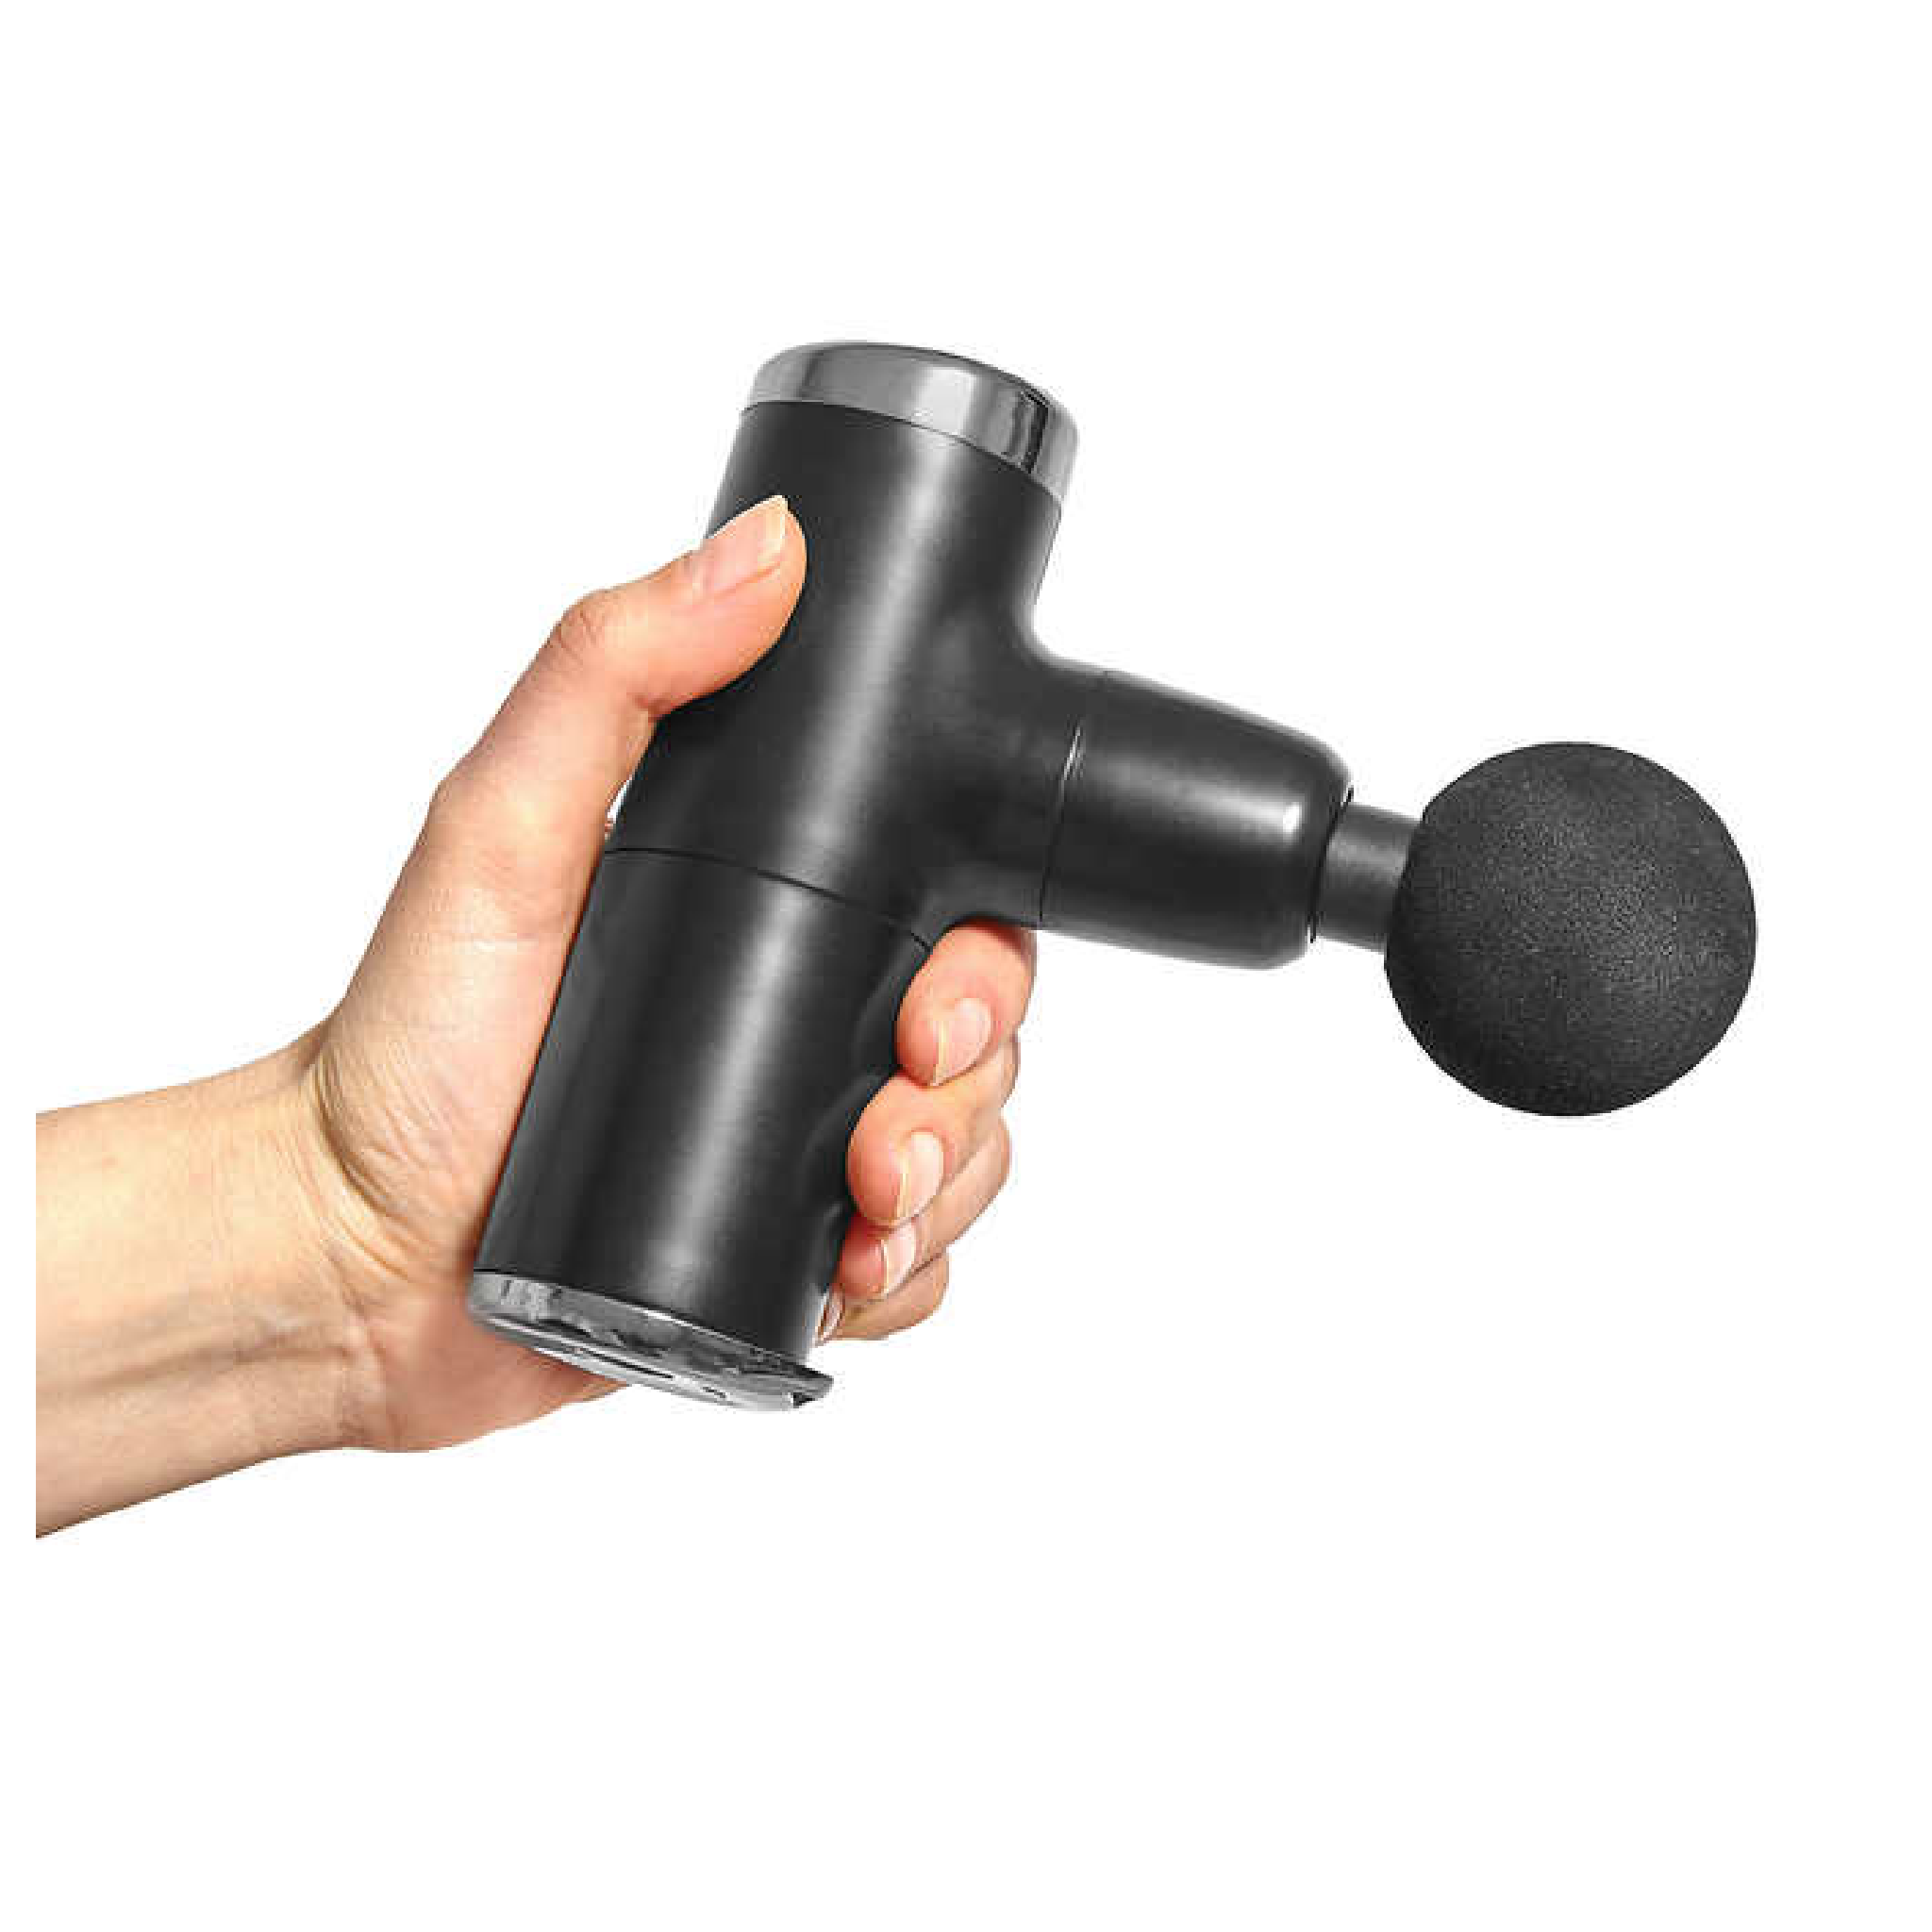 Percussion Massager